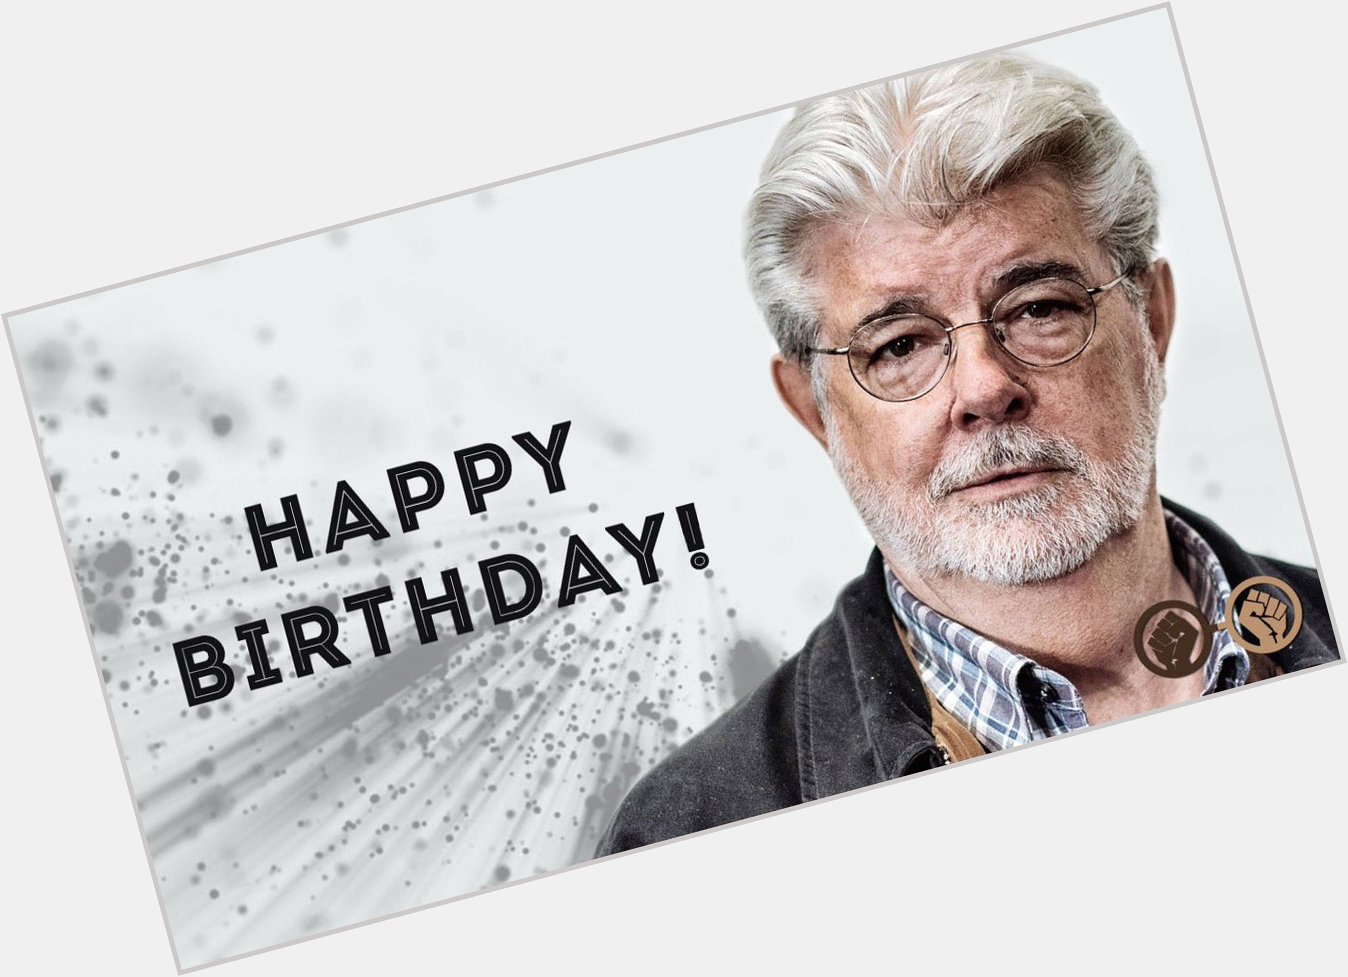 Happy Birthday, George Lucas! The man who gave us \Star Wars\ & \Indiana Jones\ turns 74 today! 